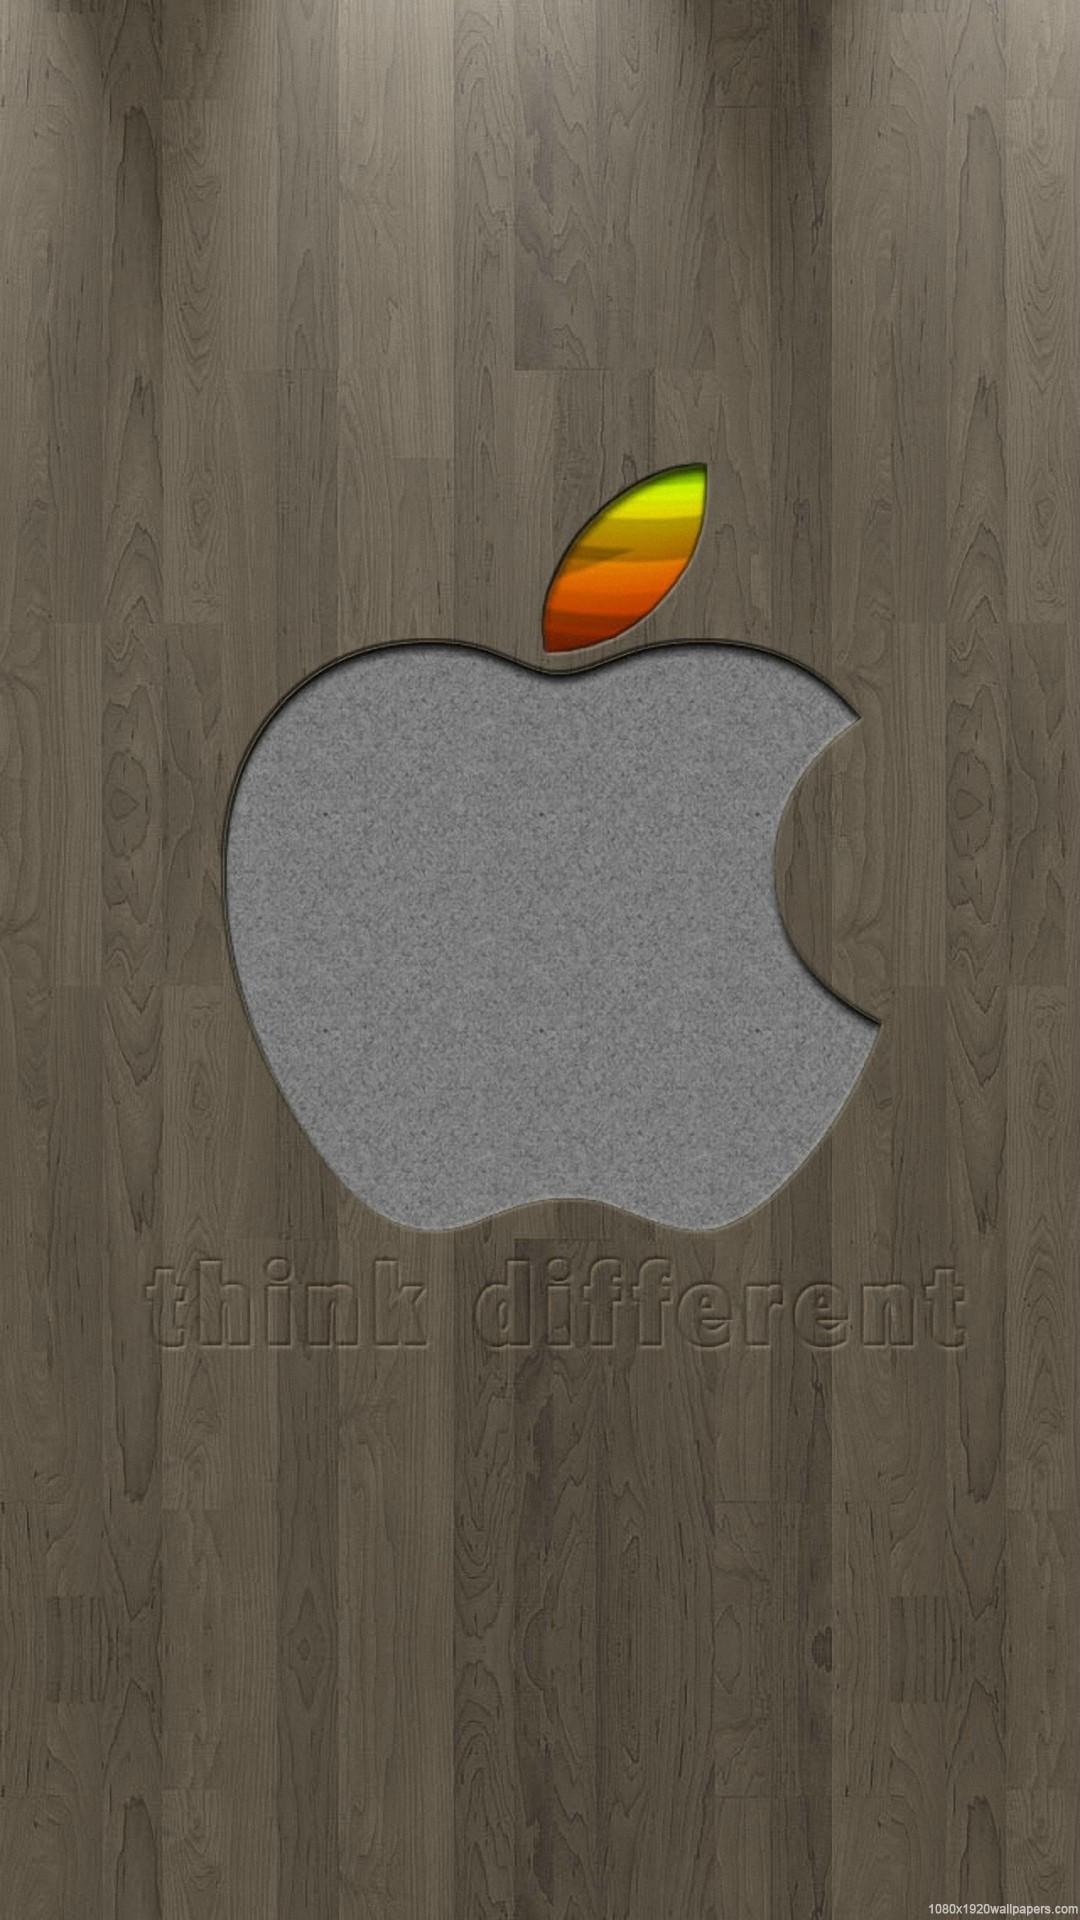 Hd Apple Logo Wallpaper For iPhone Cool Background Logo